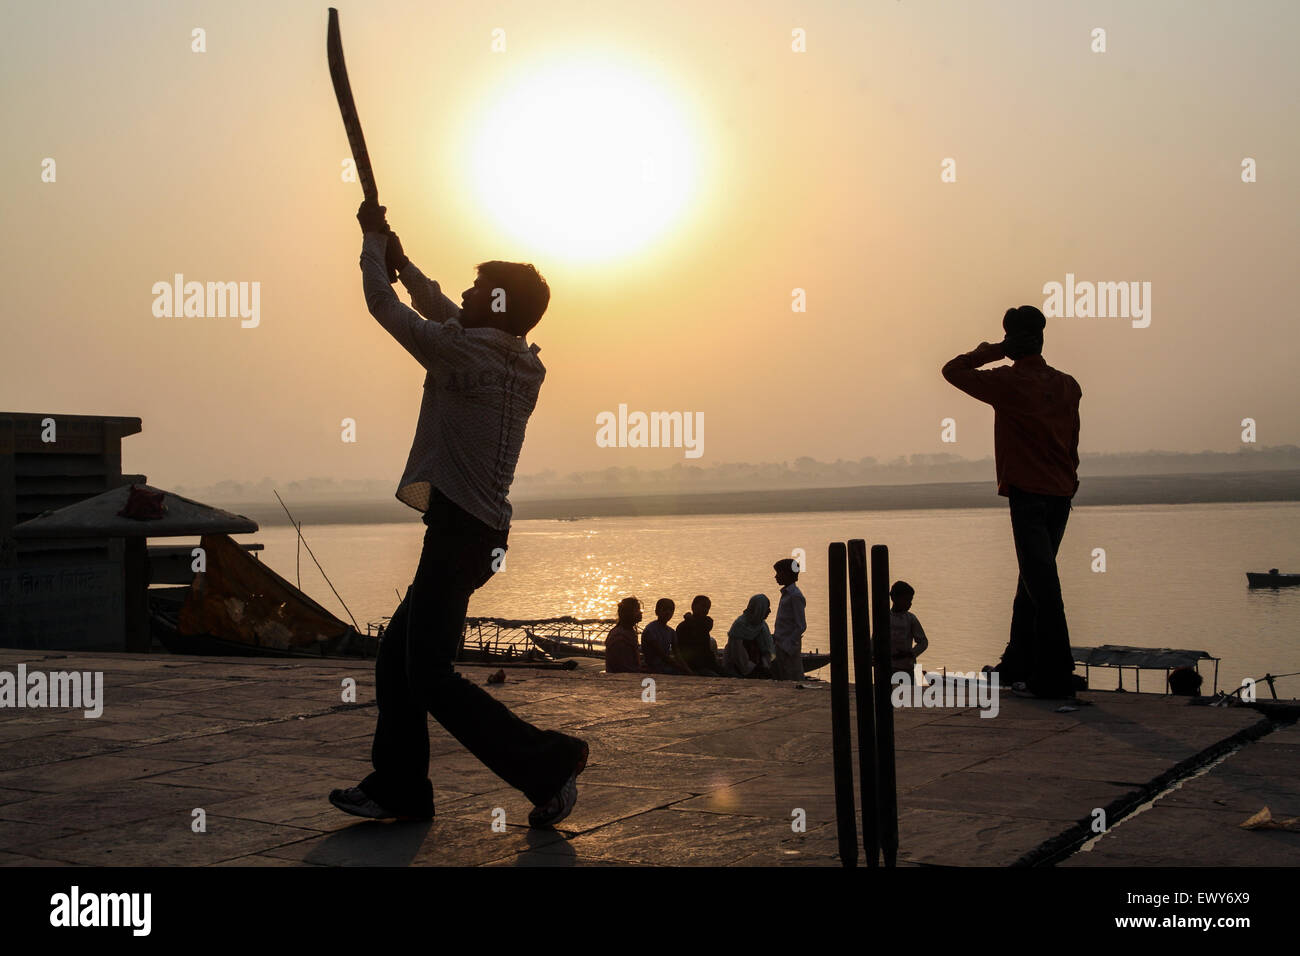 Local boys, on bathing ghat, playing popular national sport of cricket at sunrise. A good hit and the ball goes into the River Ganges. The culture of Varanasi is closely associated with the River Ganges and the river's religious importance.It is 'the religious capital of India'and an important pilgrimage destination.Varanasi, also known as Benares, an ancient city, one of the world's oldest continually inhabited cities, situated on the left/west bank of the sacred Ganges River. Regarded as holy by Hindus, Buddhists, and Jains. Uttar Pradesh State, India, Asia. Stock Photo